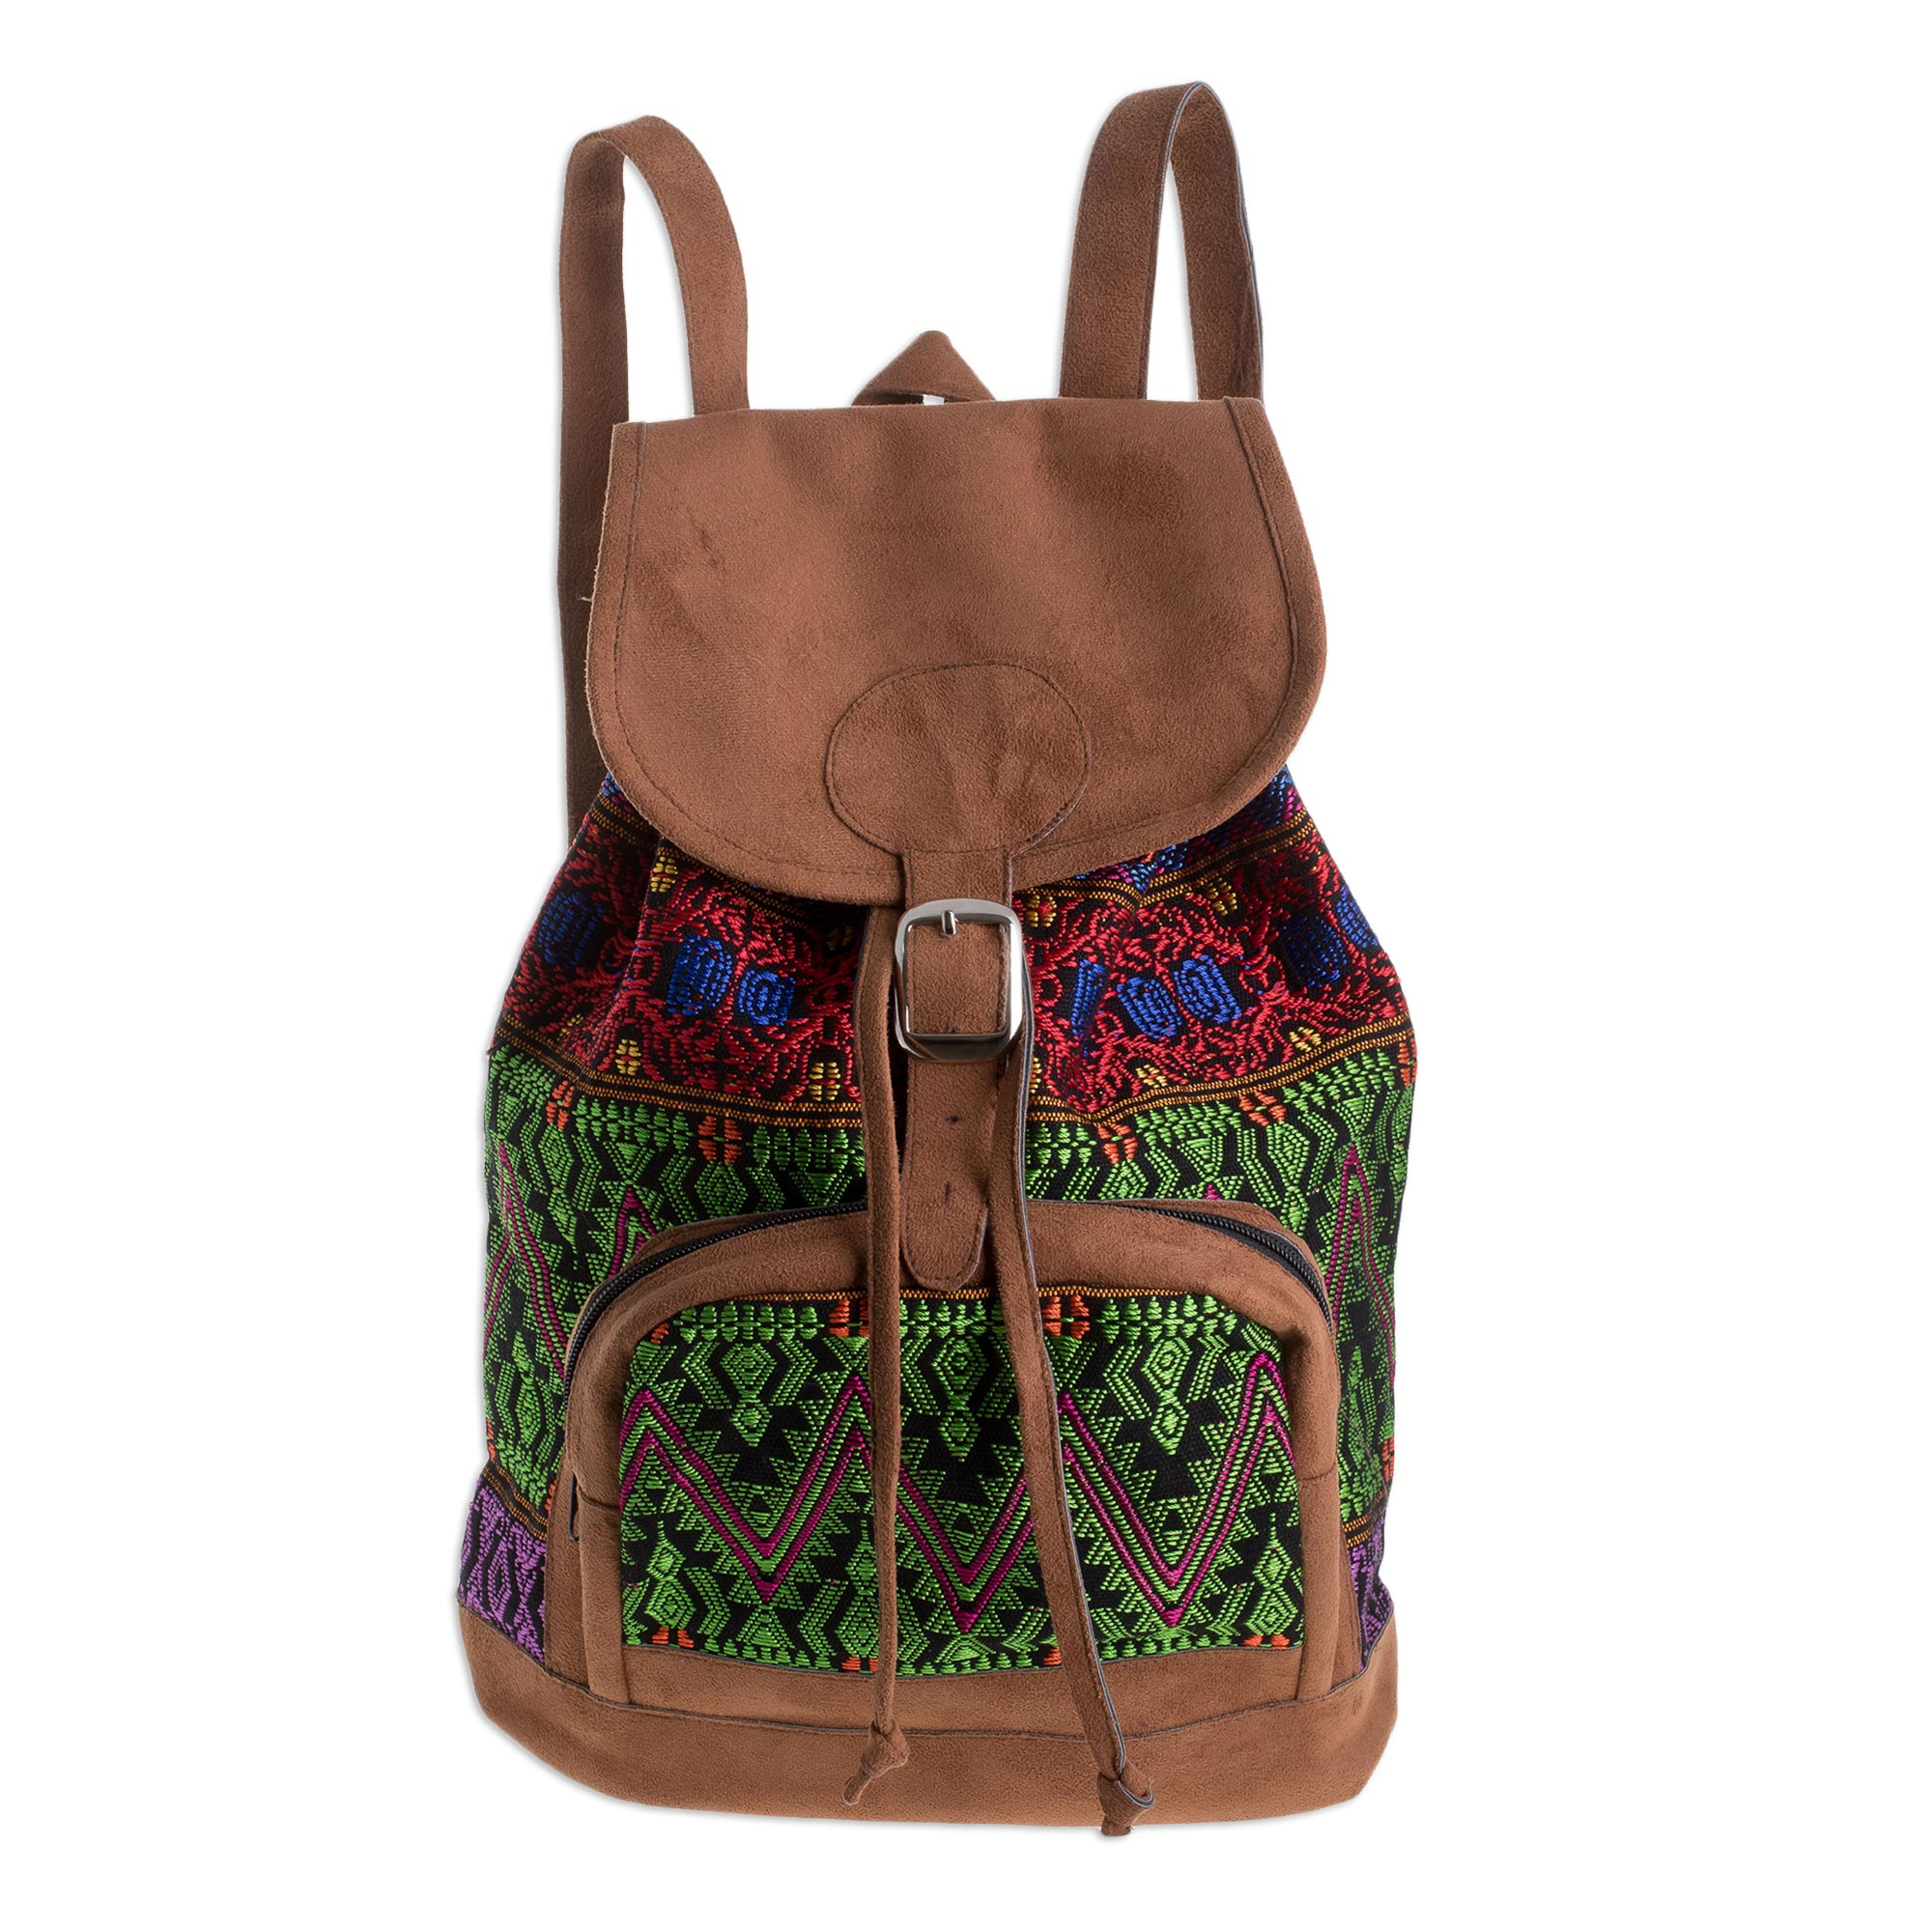 UNICEF Market | Vibrant Handwoven Cotton Backpack from Guatemala ...